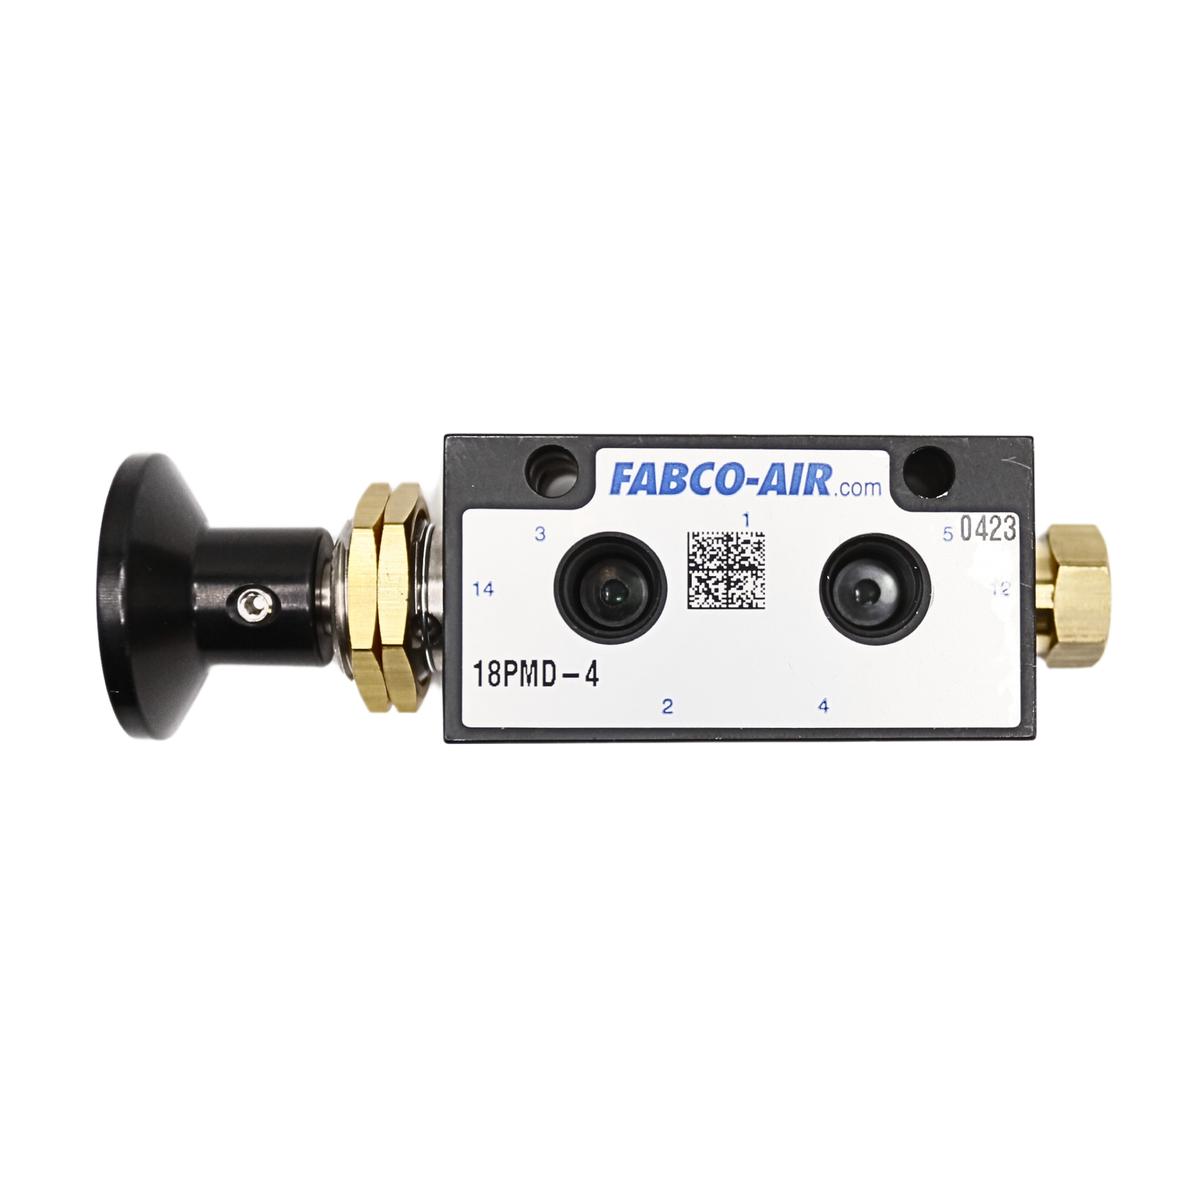 Fabco | Inline 4/2 Push Button, Detented, Panel Mount, 1/8 in NPTF | 18PMD-4 used on fabcoair product line